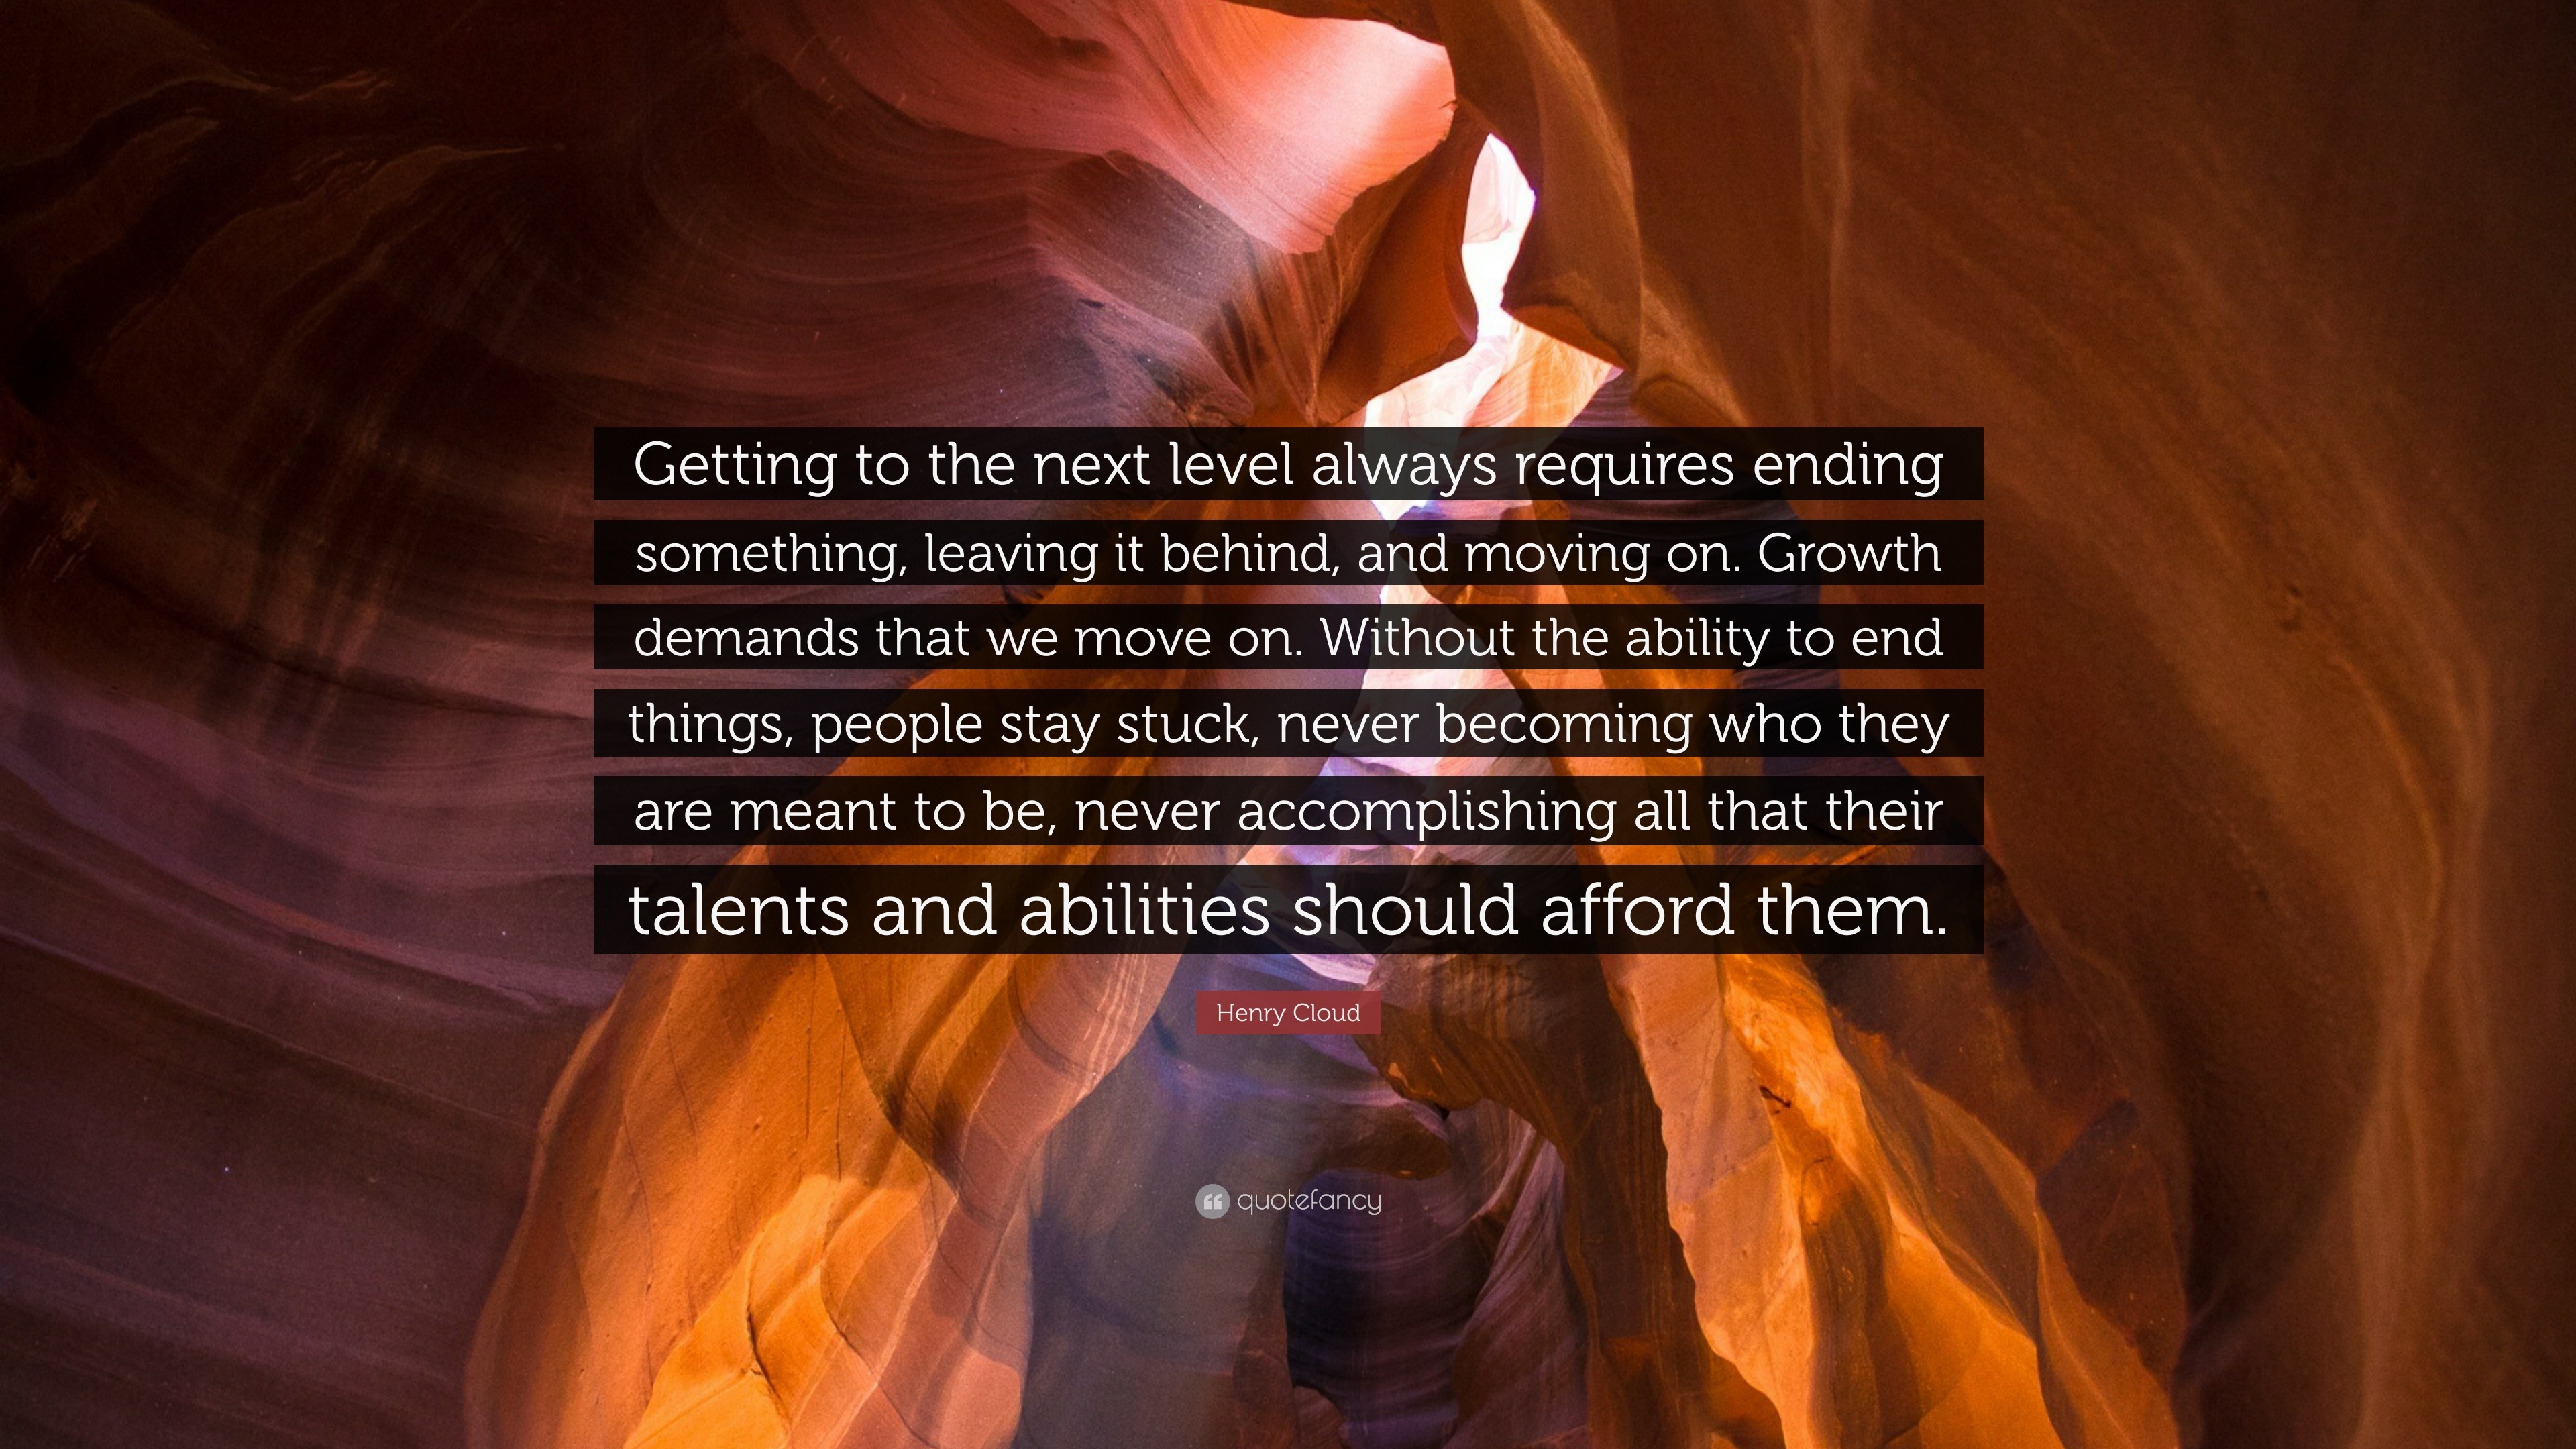 Henry Cloud Quote: “Getting to the next level always requires